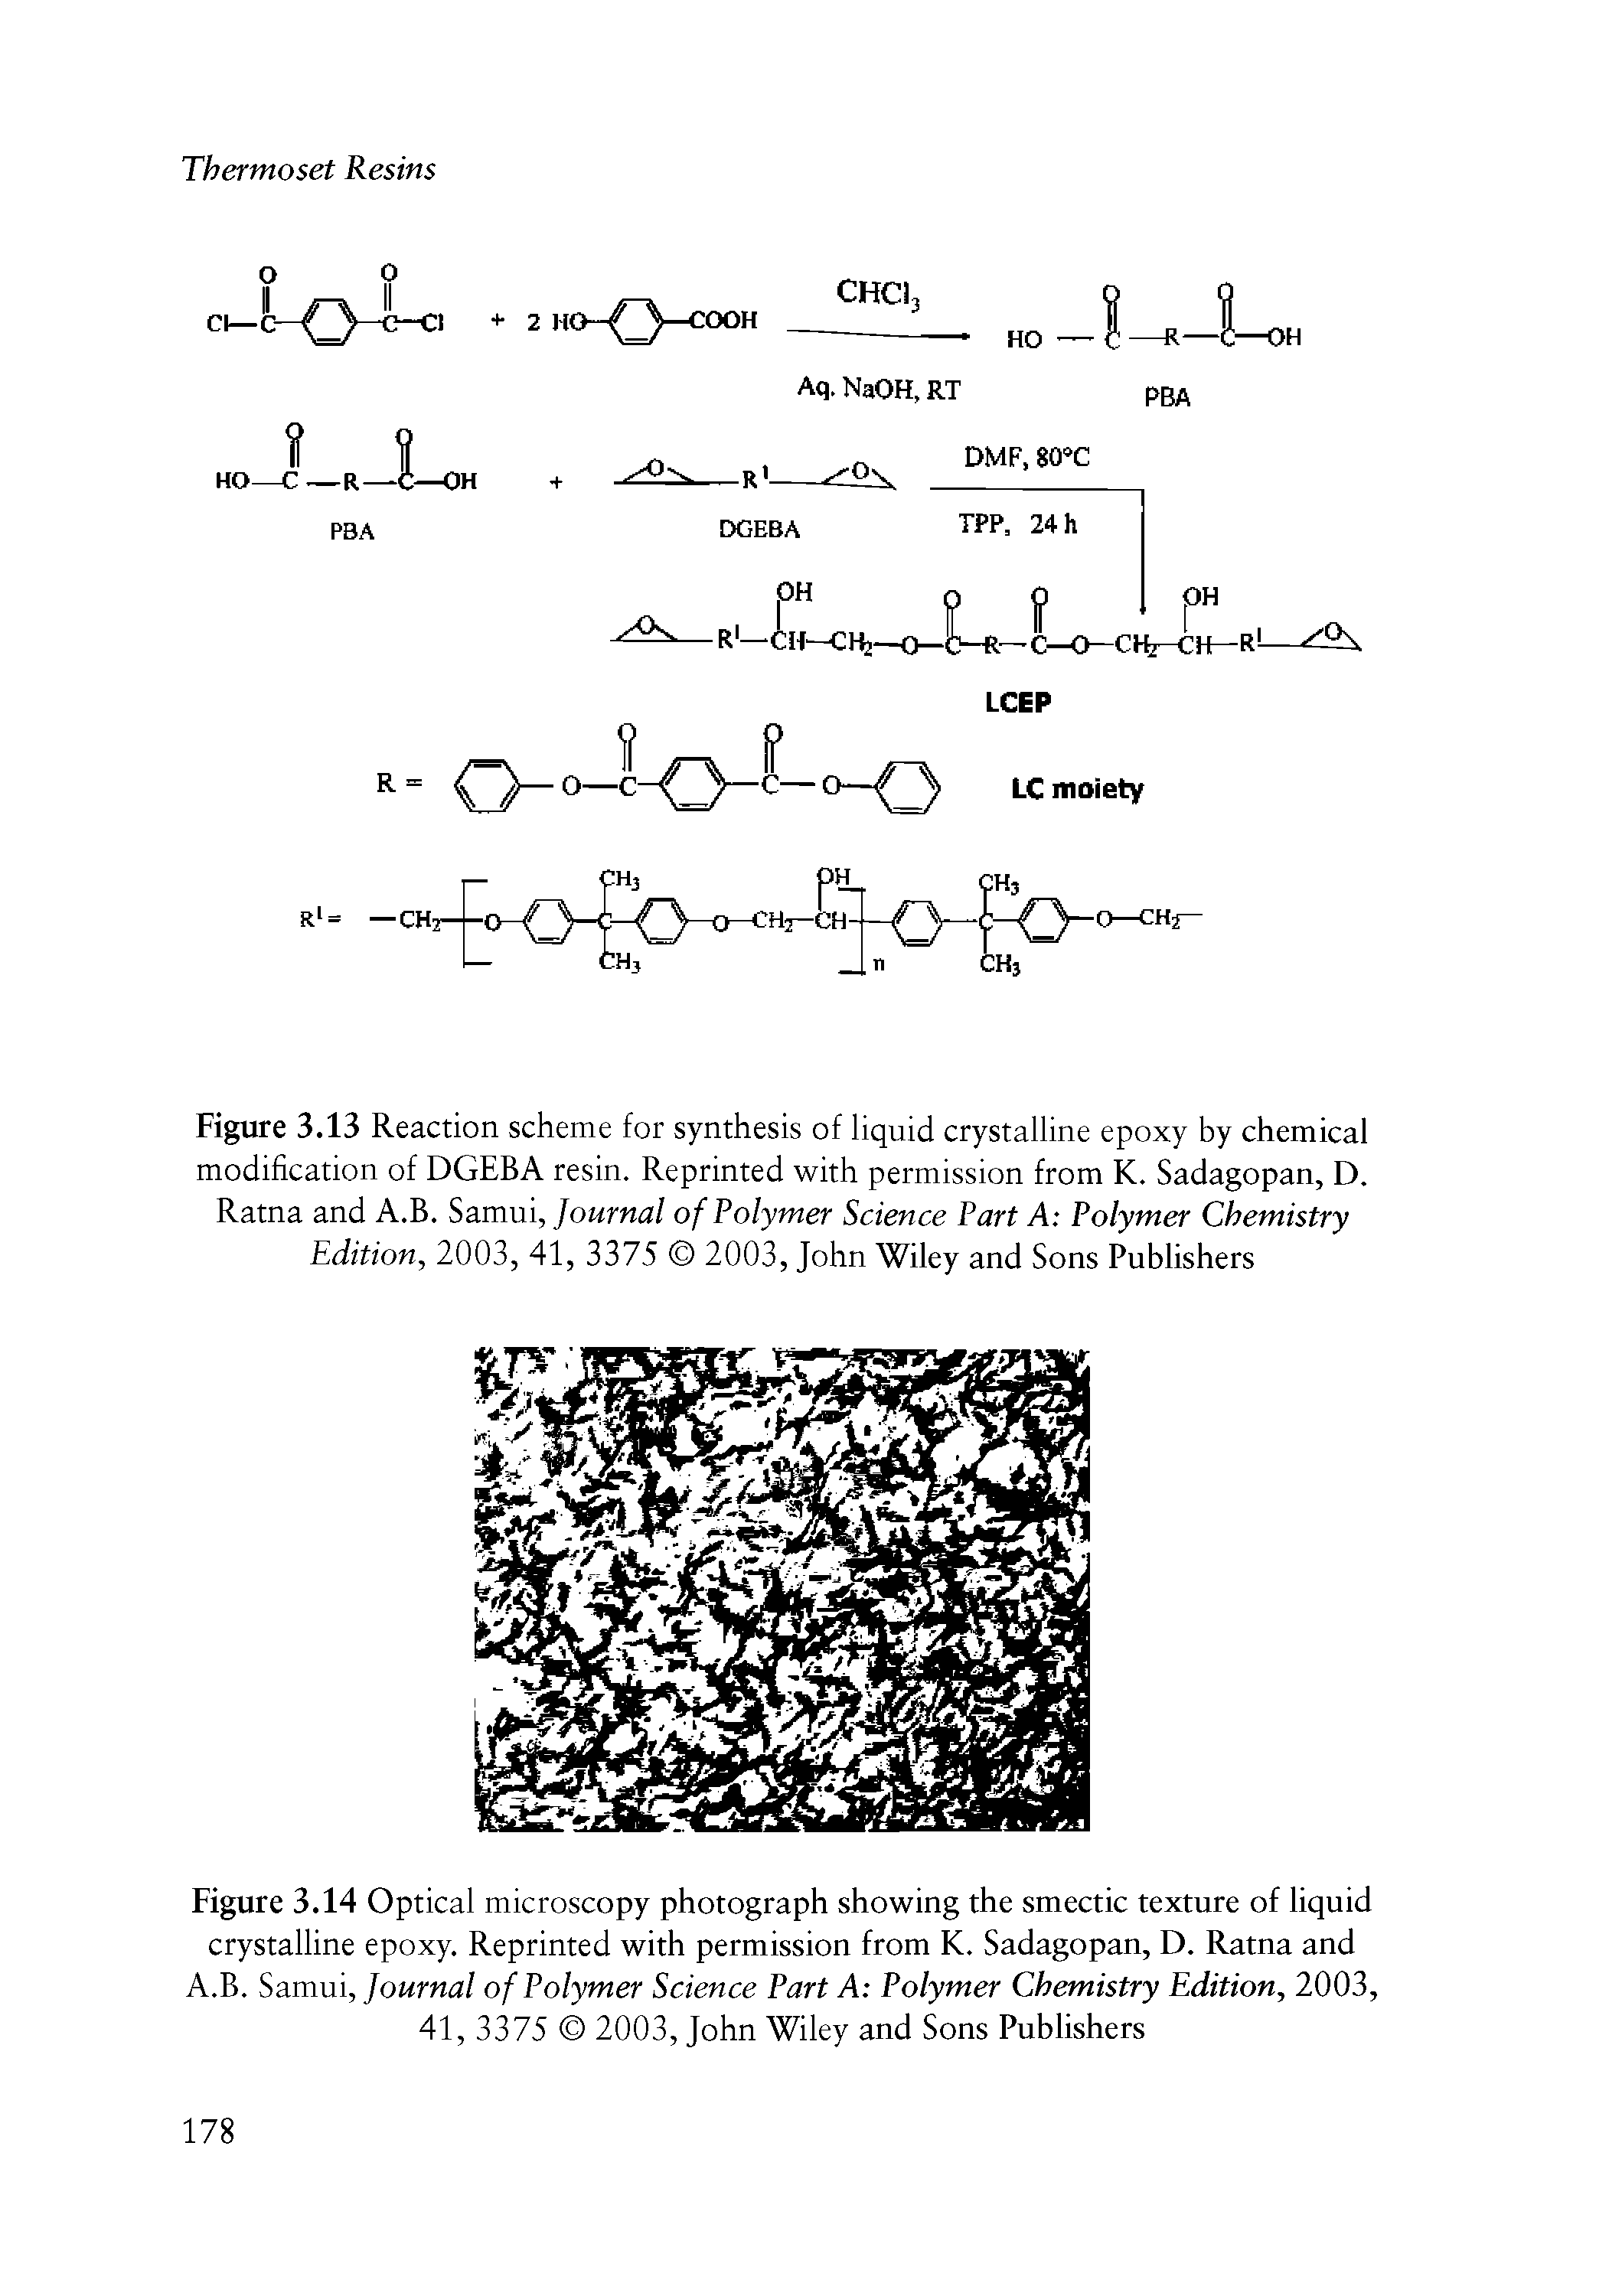 Figure 3.13 Reaction scheme for synthesis of liquid crystalline epoxy by chemical modification of DGEBA resin. Reprinted with permission from K. Sadagopan, D. Ratna and A.B. Samui, Journal of Polymer Science Part A Polymer Chemistry Edition, 2003, 41, 3375 2003, John Wiley and Sons Publishers...